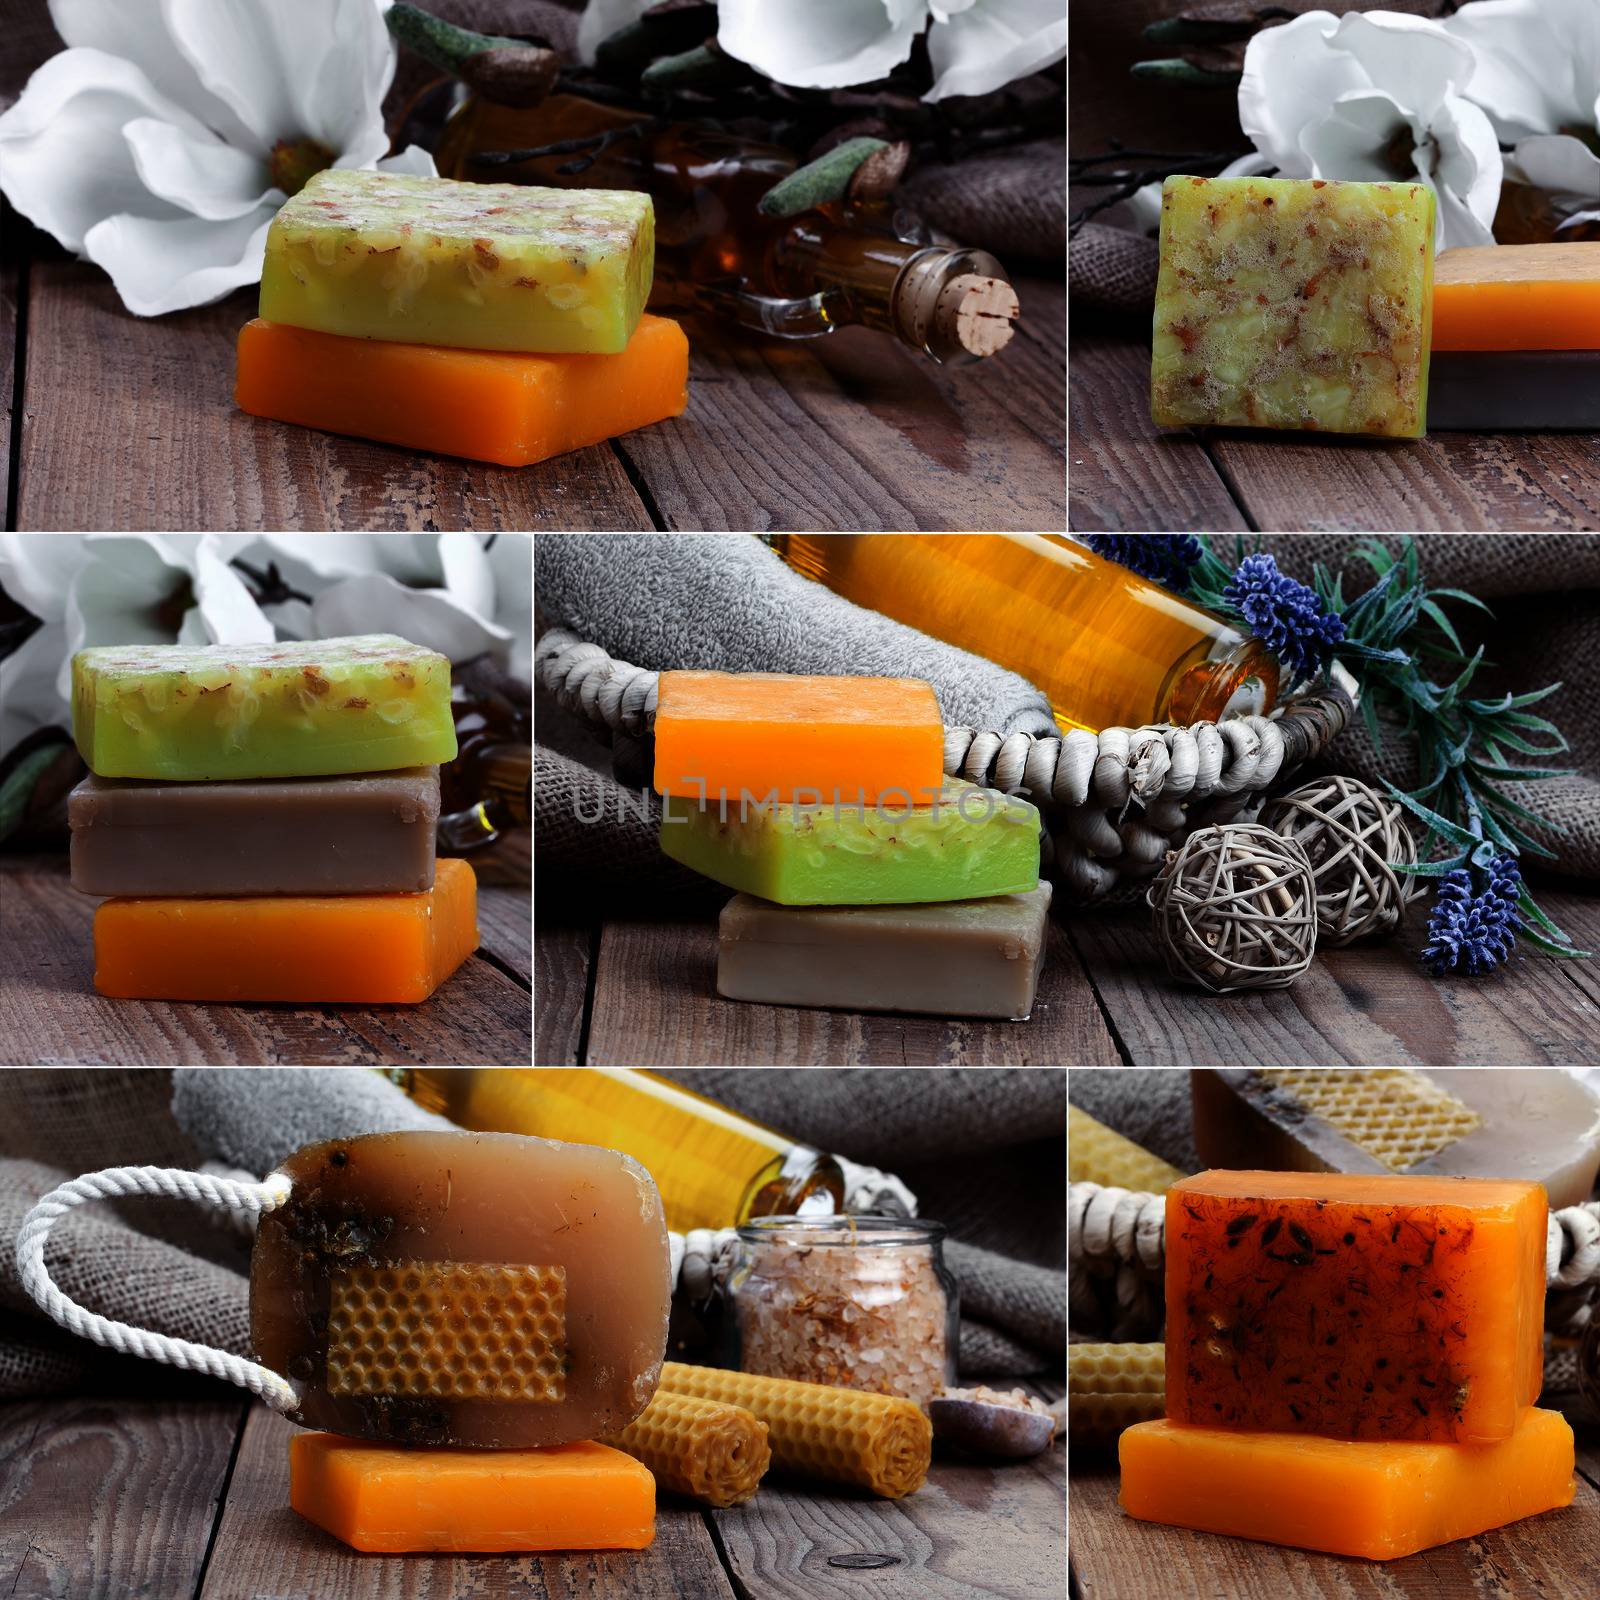 collage of colorful handmade soap bars, on wooden background by motorolka